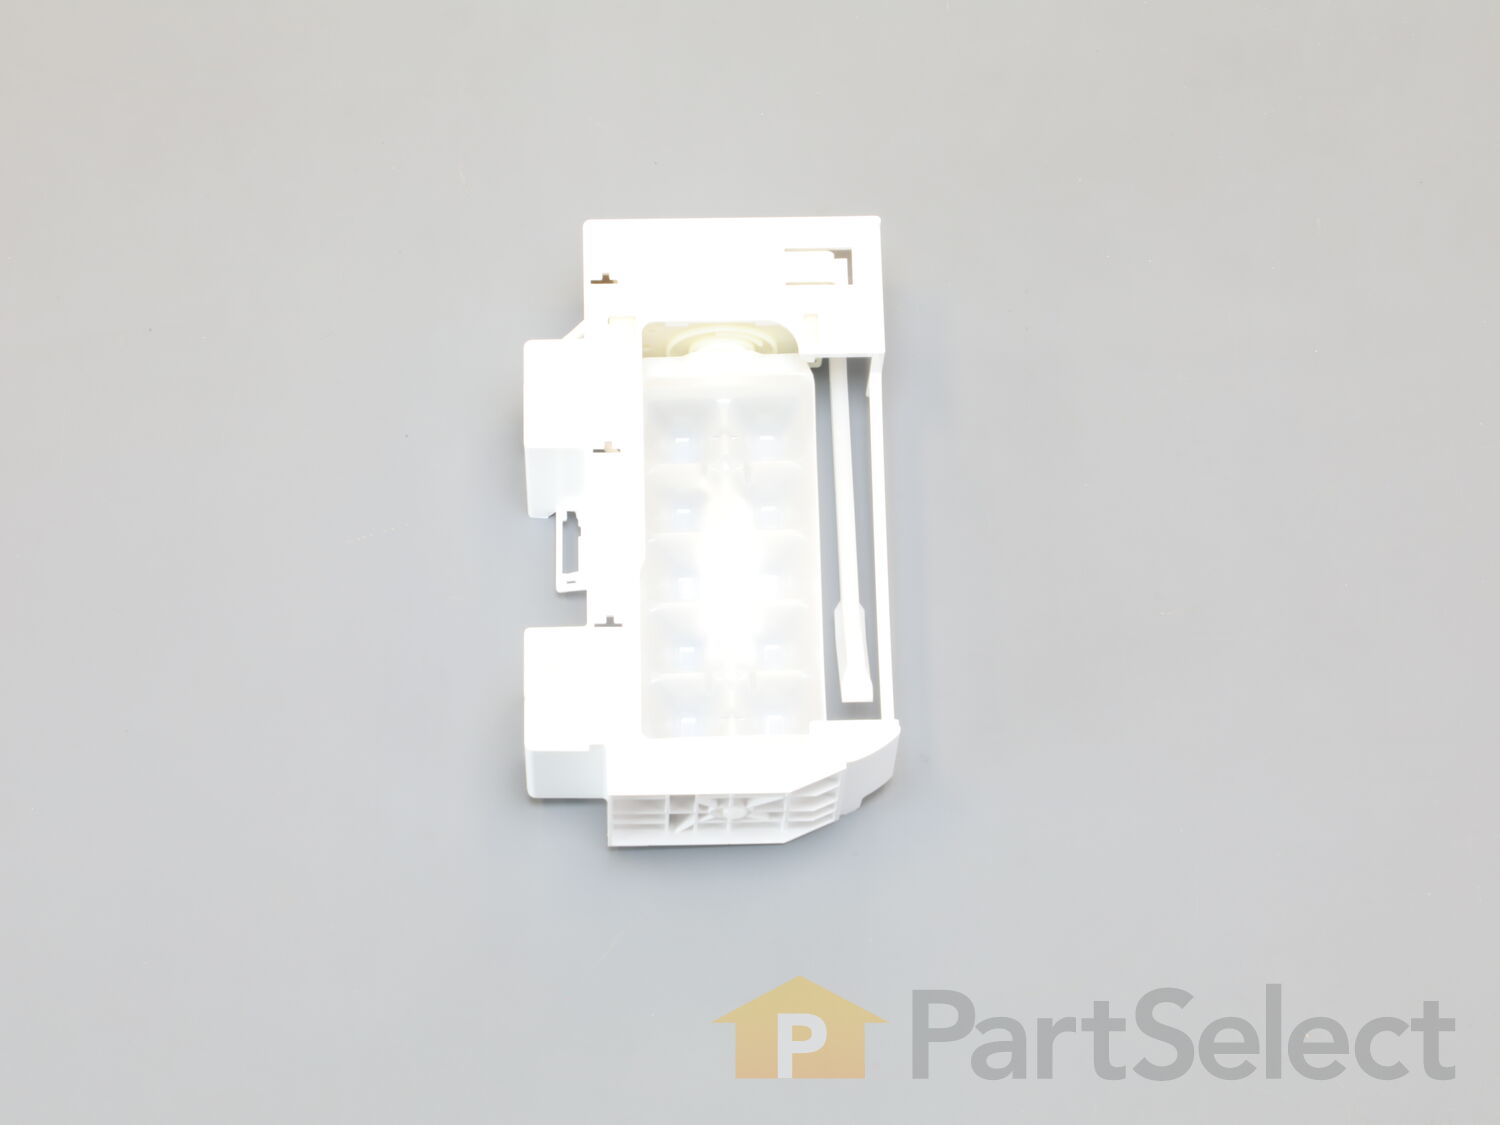 Details about   Choice Parts W10873791 for Whirlpool Refrigerator Ice Maker 